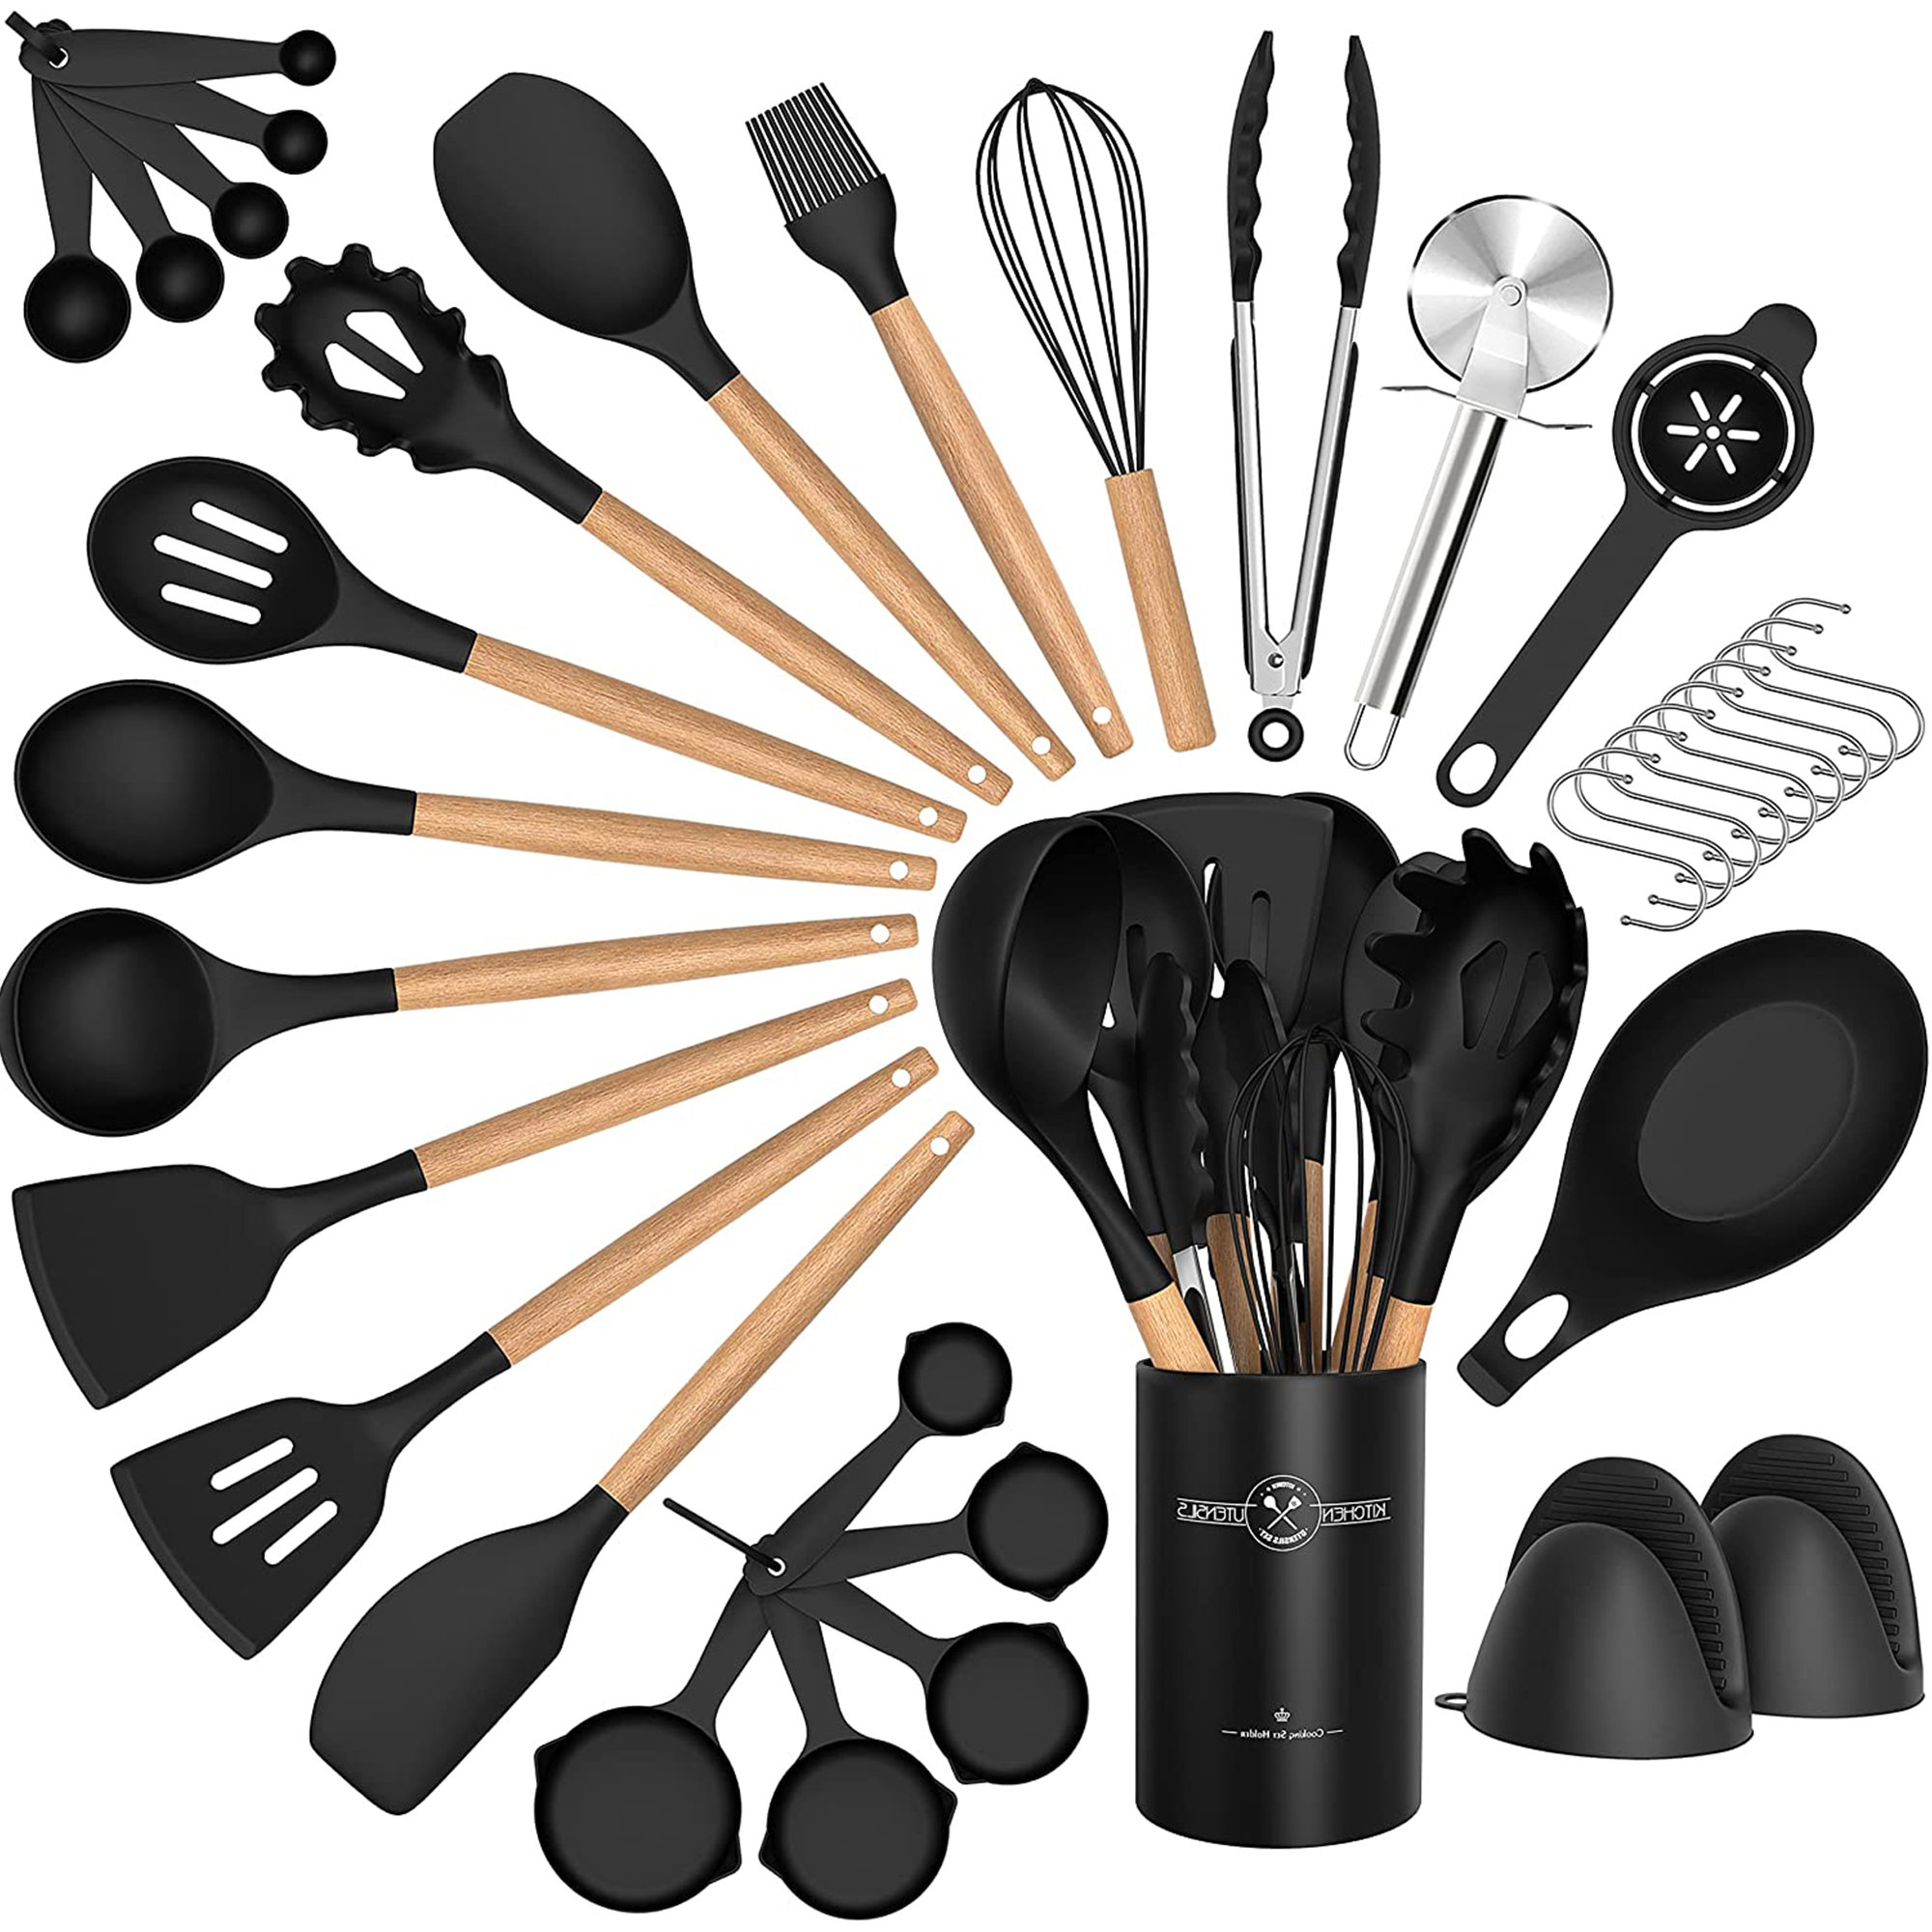 DGPCT 26 -Piece Cooking Spoon Set with Utensil Crock